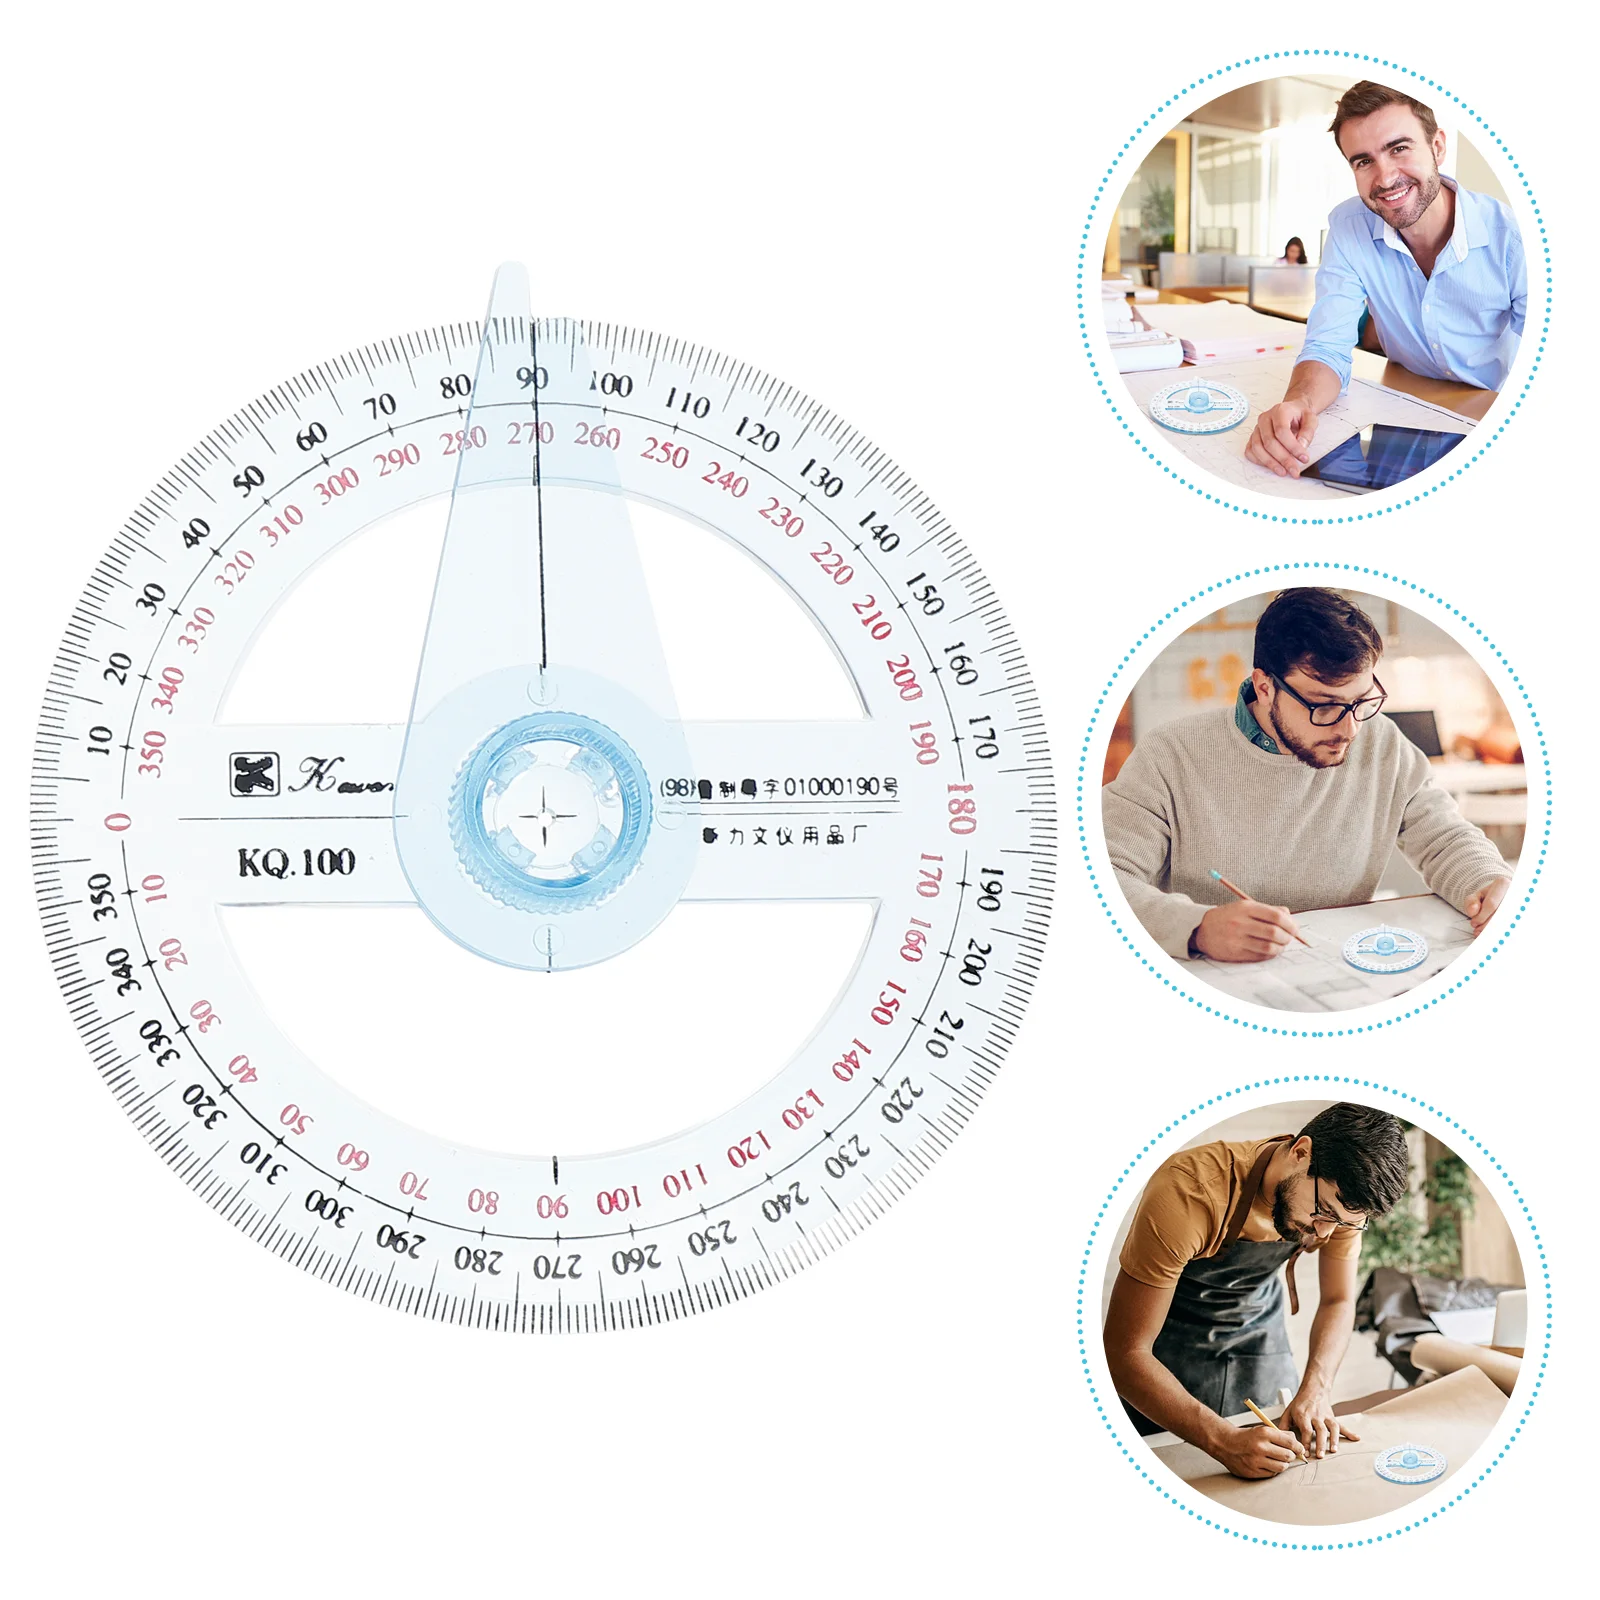 2pcs Circle Protractor 360 Degree Protractor Ruler Math Geometry Tools for School Classroom Office Drafting Measuring Supplies 2pcs innovative visible corrosion resistant measuring 360 degree pointer ruler for worker drawing protractor protractor